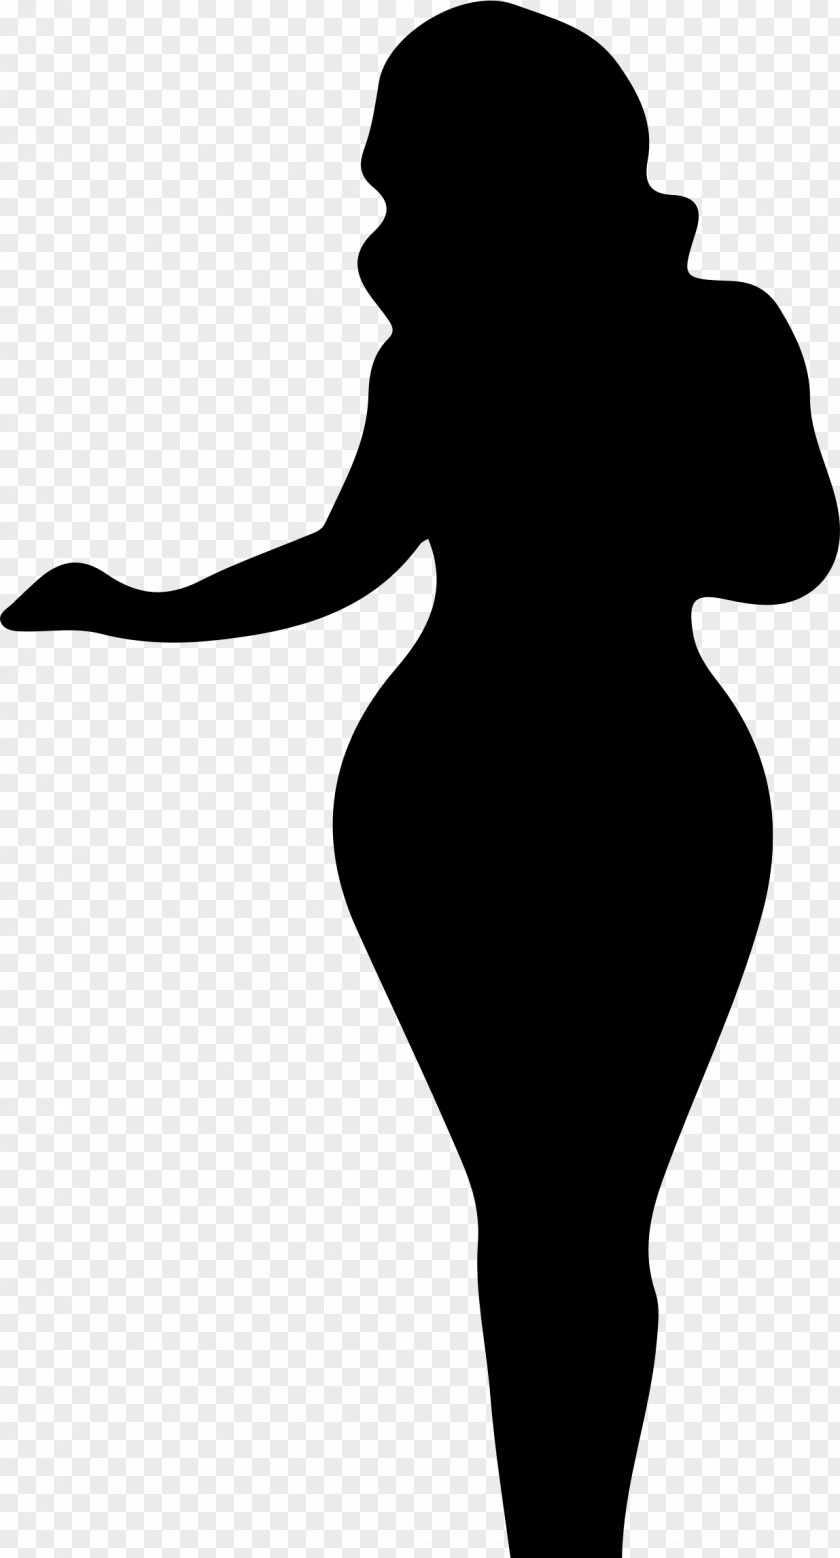 Blackandwhite Standing People Silhouette PNG